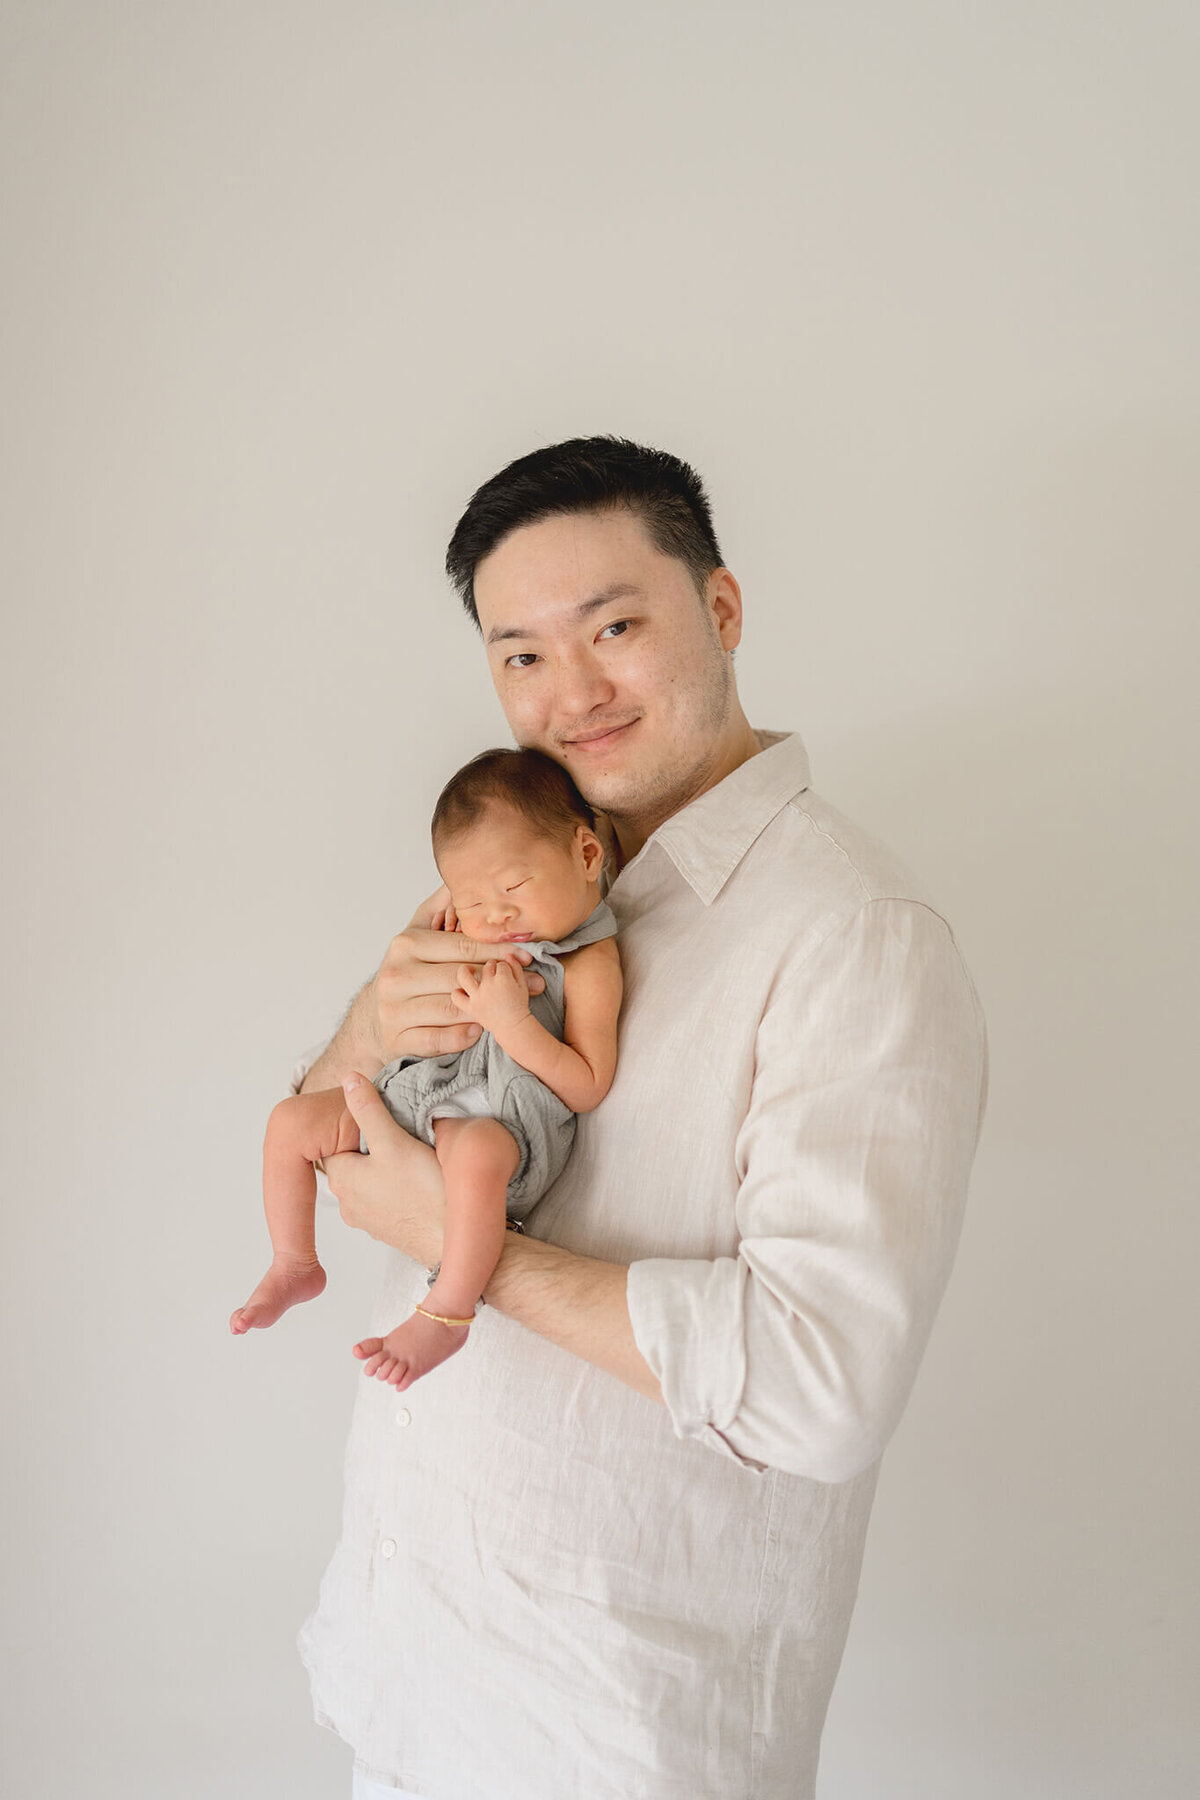 Celebrate the miracle of life as first-time Chinese dad cuddle their newborn in endearing Gold Coast maternity photos.